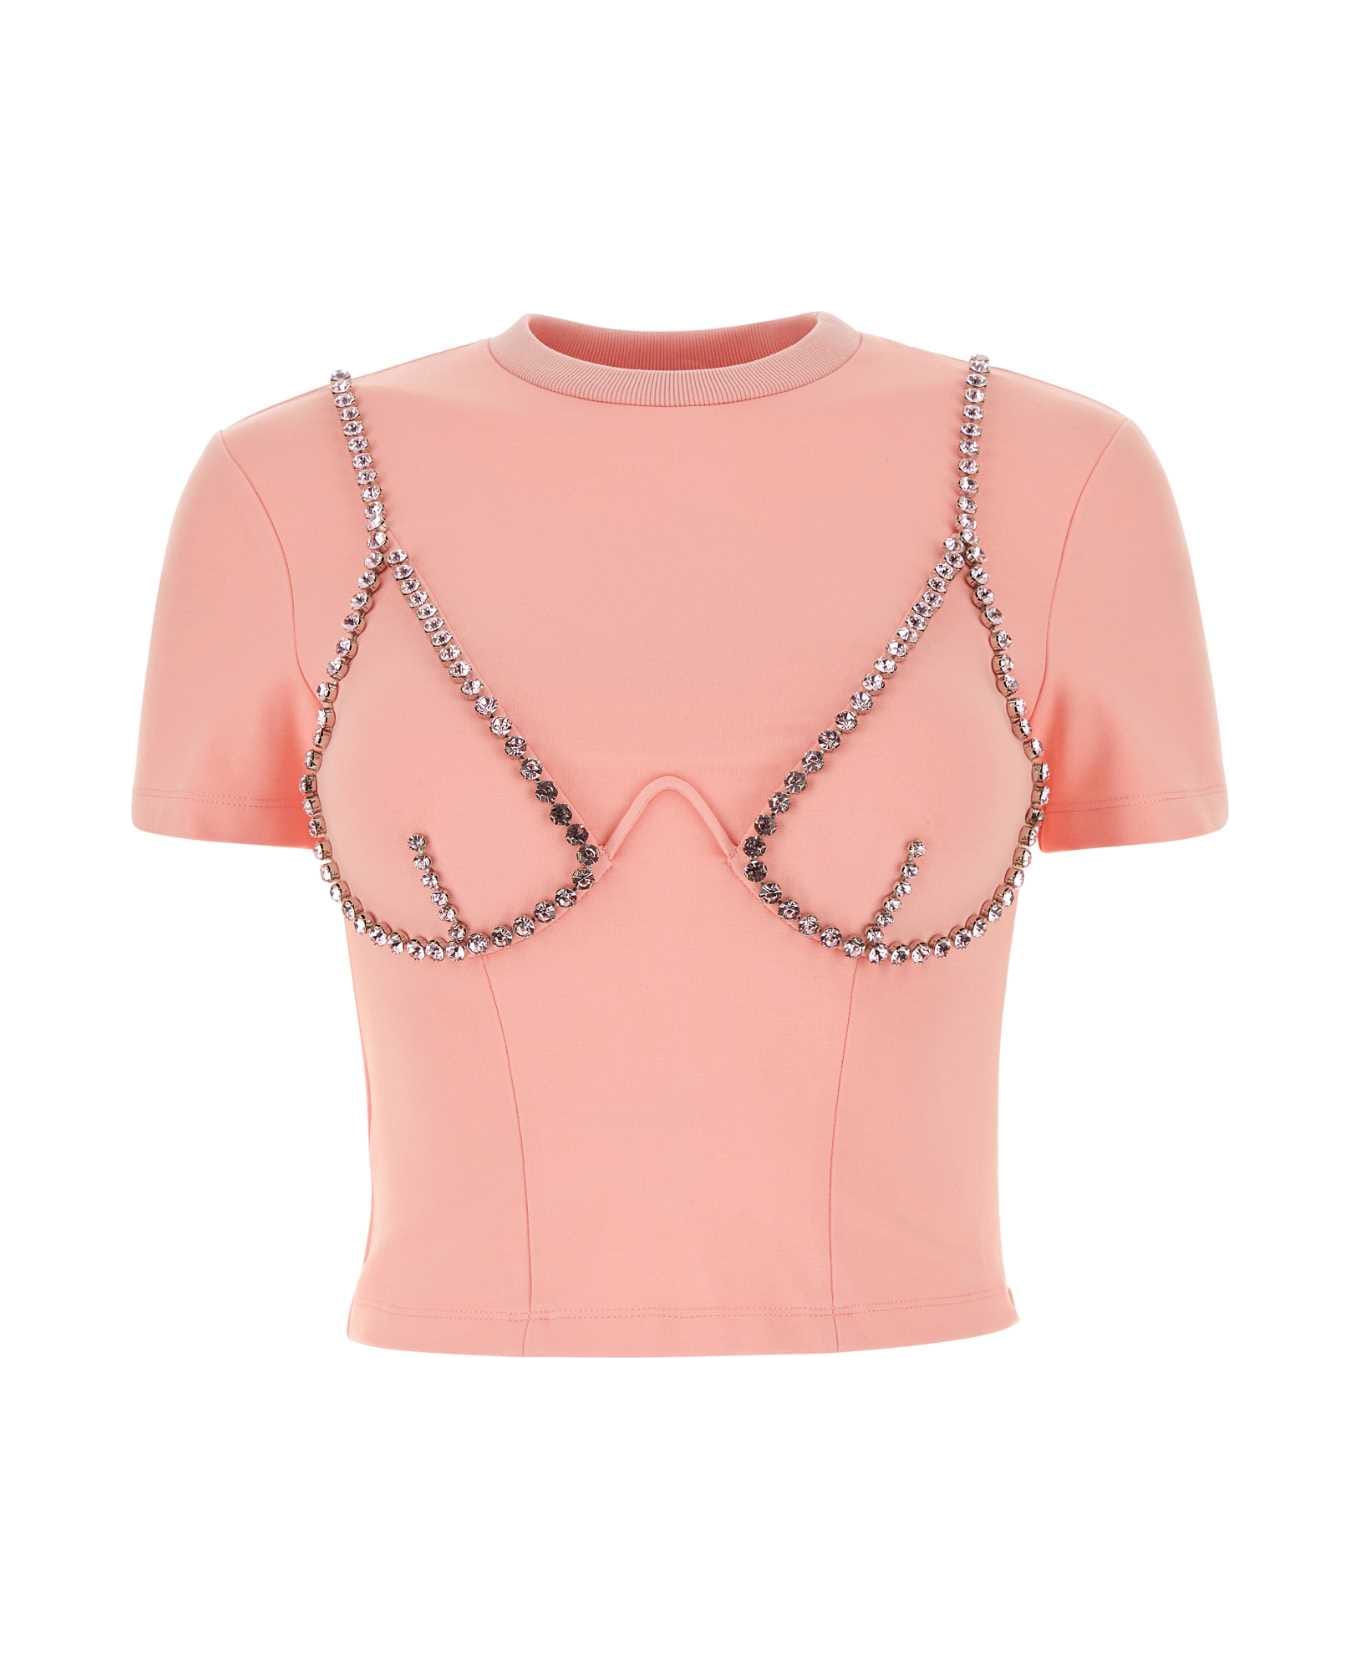 AREA Pink Stretch Jersey T-shirt - CANDYROSE